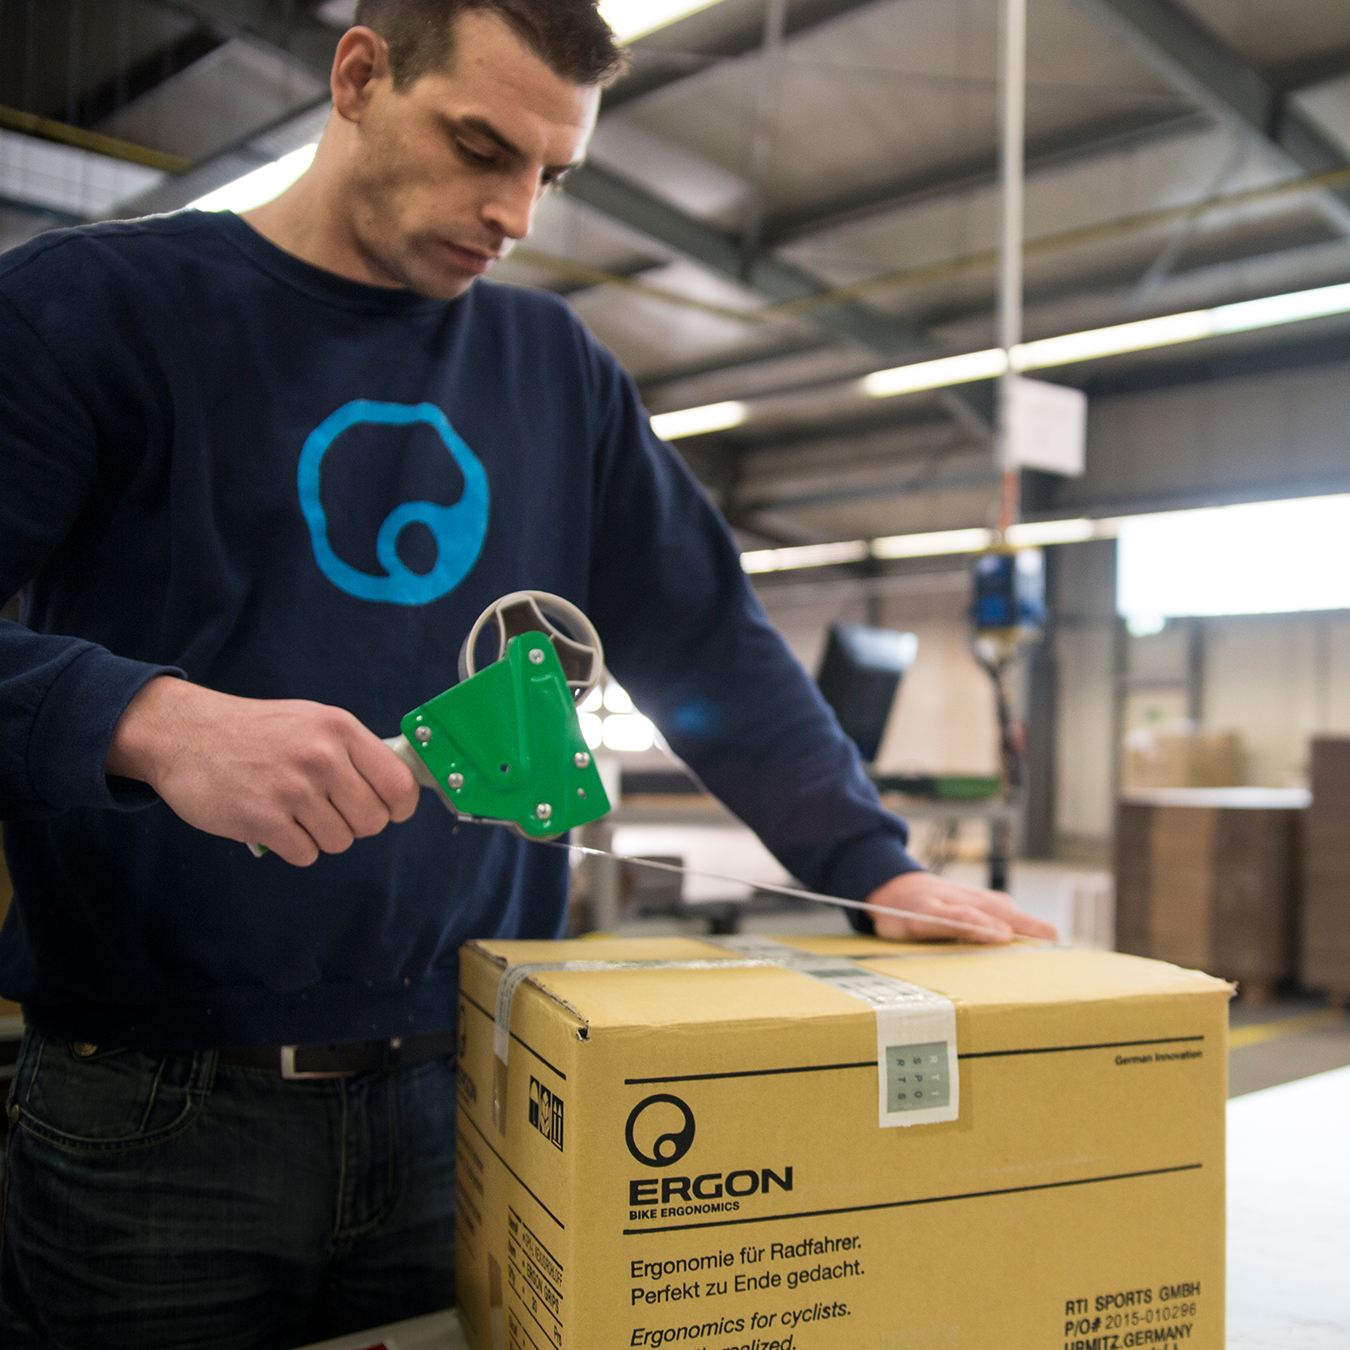 A package from Ergon getting prepared for shipping.